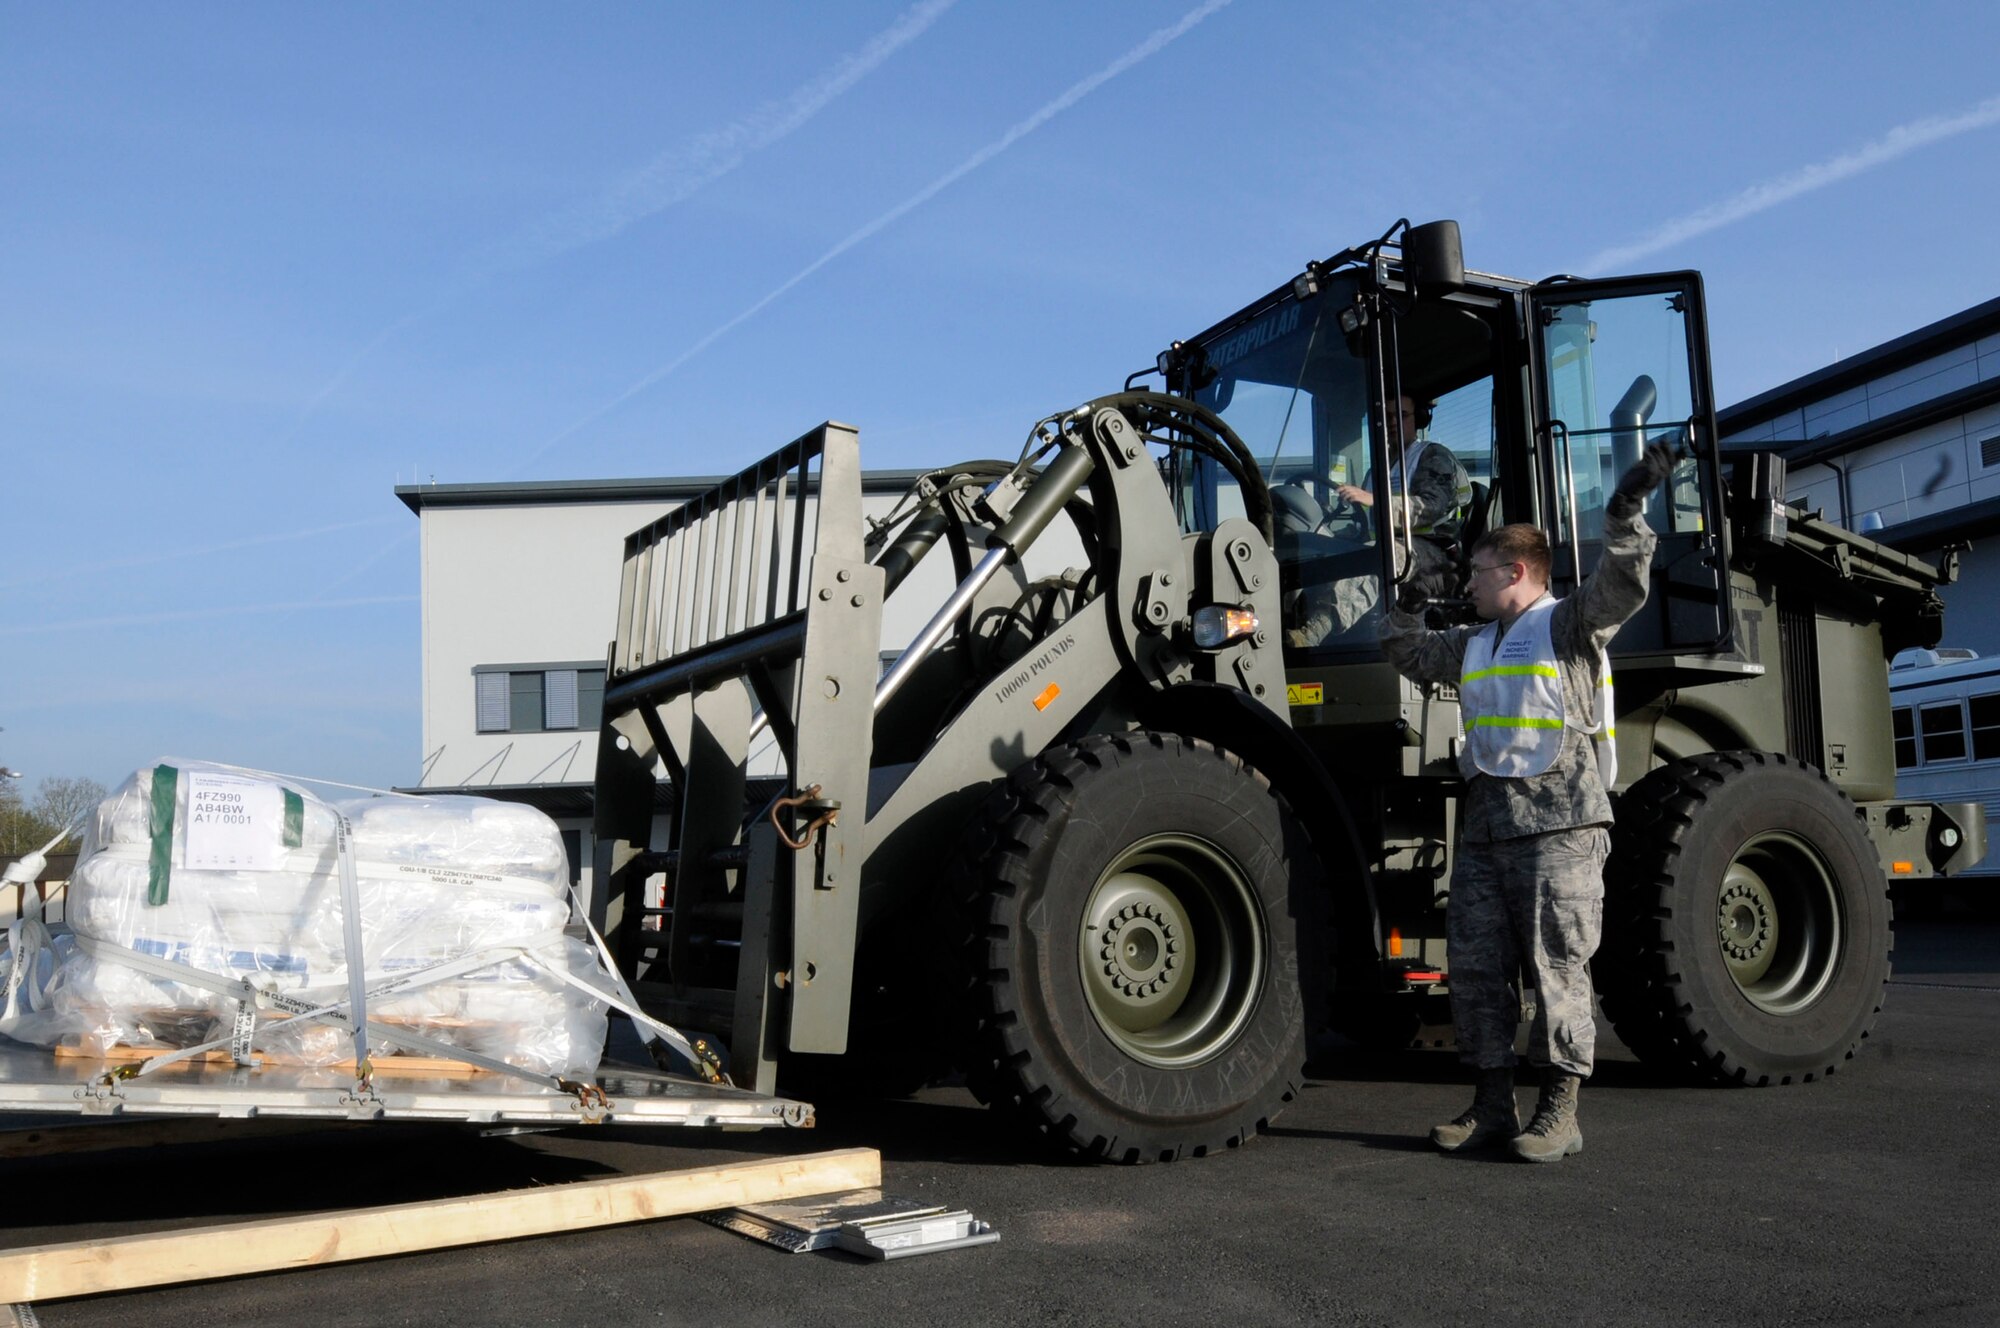 U.S. Air Force Airman 1st Class Mark Rapala directs Senior Airman Zachary Davis, both from the 86th Logistics Readiness Squadron, as he moves a pallet in support of Joint Task Force Odyssey Dawn, Ramstein Air Base, Germany, March 24, 2011. Joint Task Force Odyssey Dawn is the U.S. Africa Command task force established to provide operational and tactical command and control of U.S. military forces supporting the international response to the unrest in Libya and enforcement of United Nations Security Council Resolution (UNSCR) 1973. UNSCR 1973 authorizes all necessary measures to protect civilians in Libya under threat of attack by Qadhafi regime forces. JTF Odyssey Dawn is commanded by U.S. Navy Admiral Samuel J. Locklear, III. (U.S. Air Force photo by Airman Kendra Alba)
